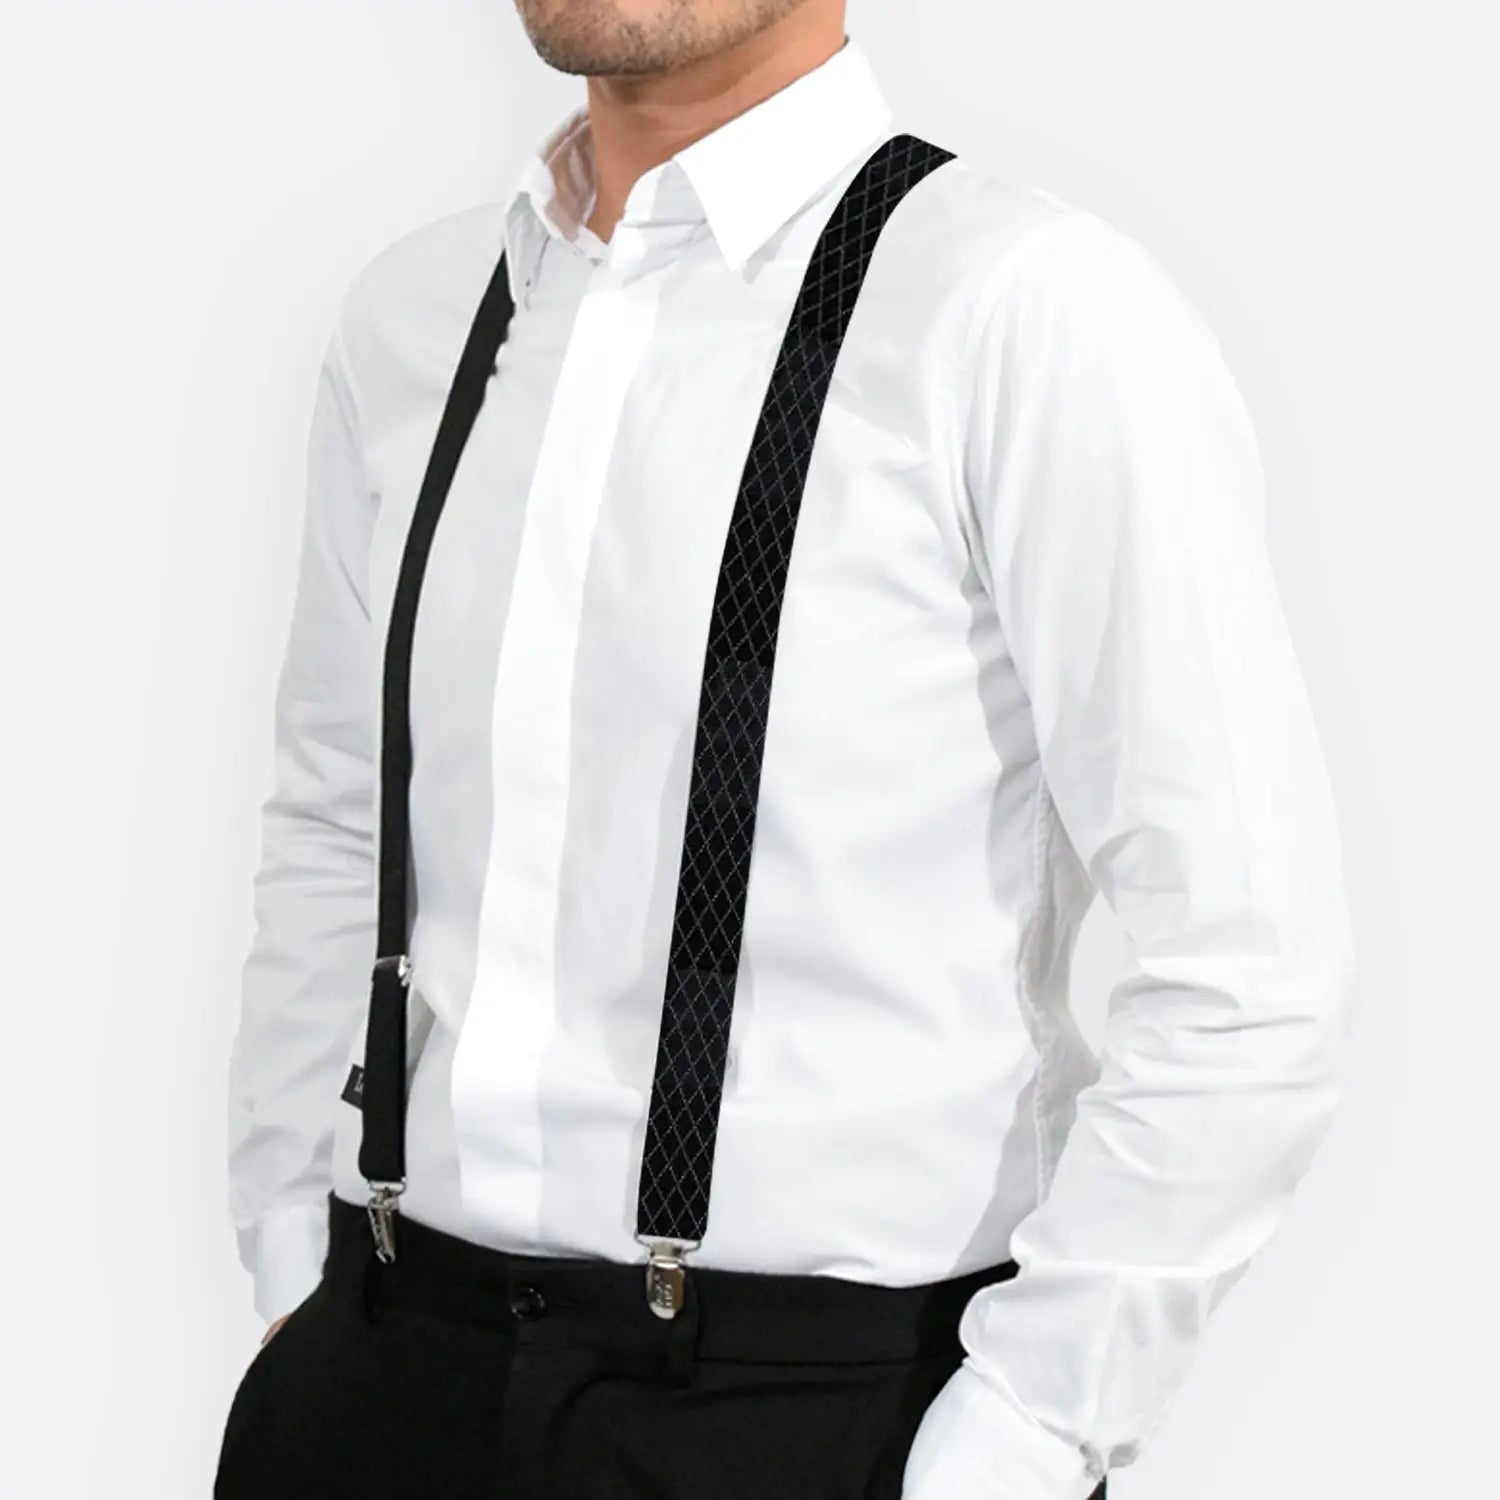 Men’s 35mm Y-Shape Wide Leather Braces with Stylish Patterns - White Shirt Black Suspenders